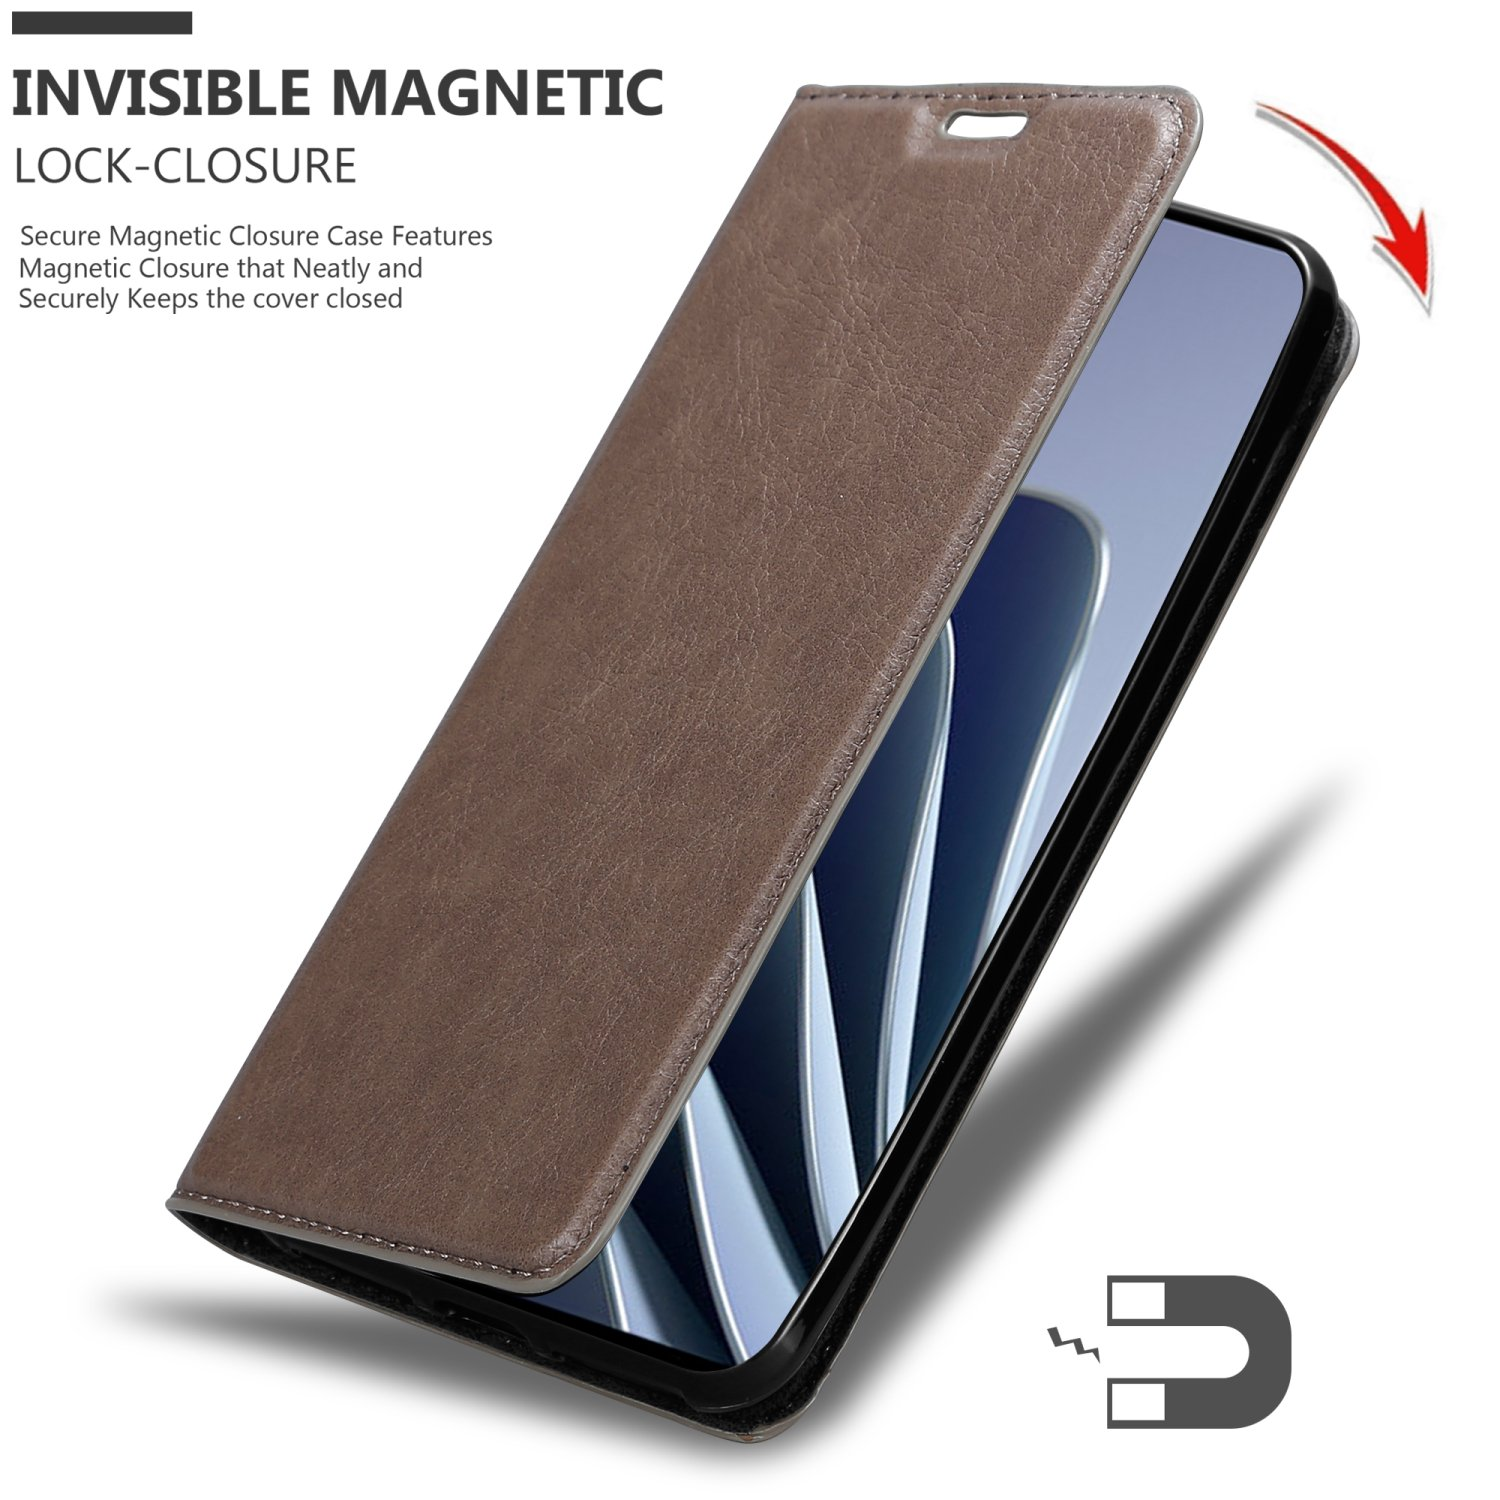 CADORABO Book 10 PRO KAFFEE Invisible BRAUN OnePlus, Hülle 5G, Bookcover, Magnet